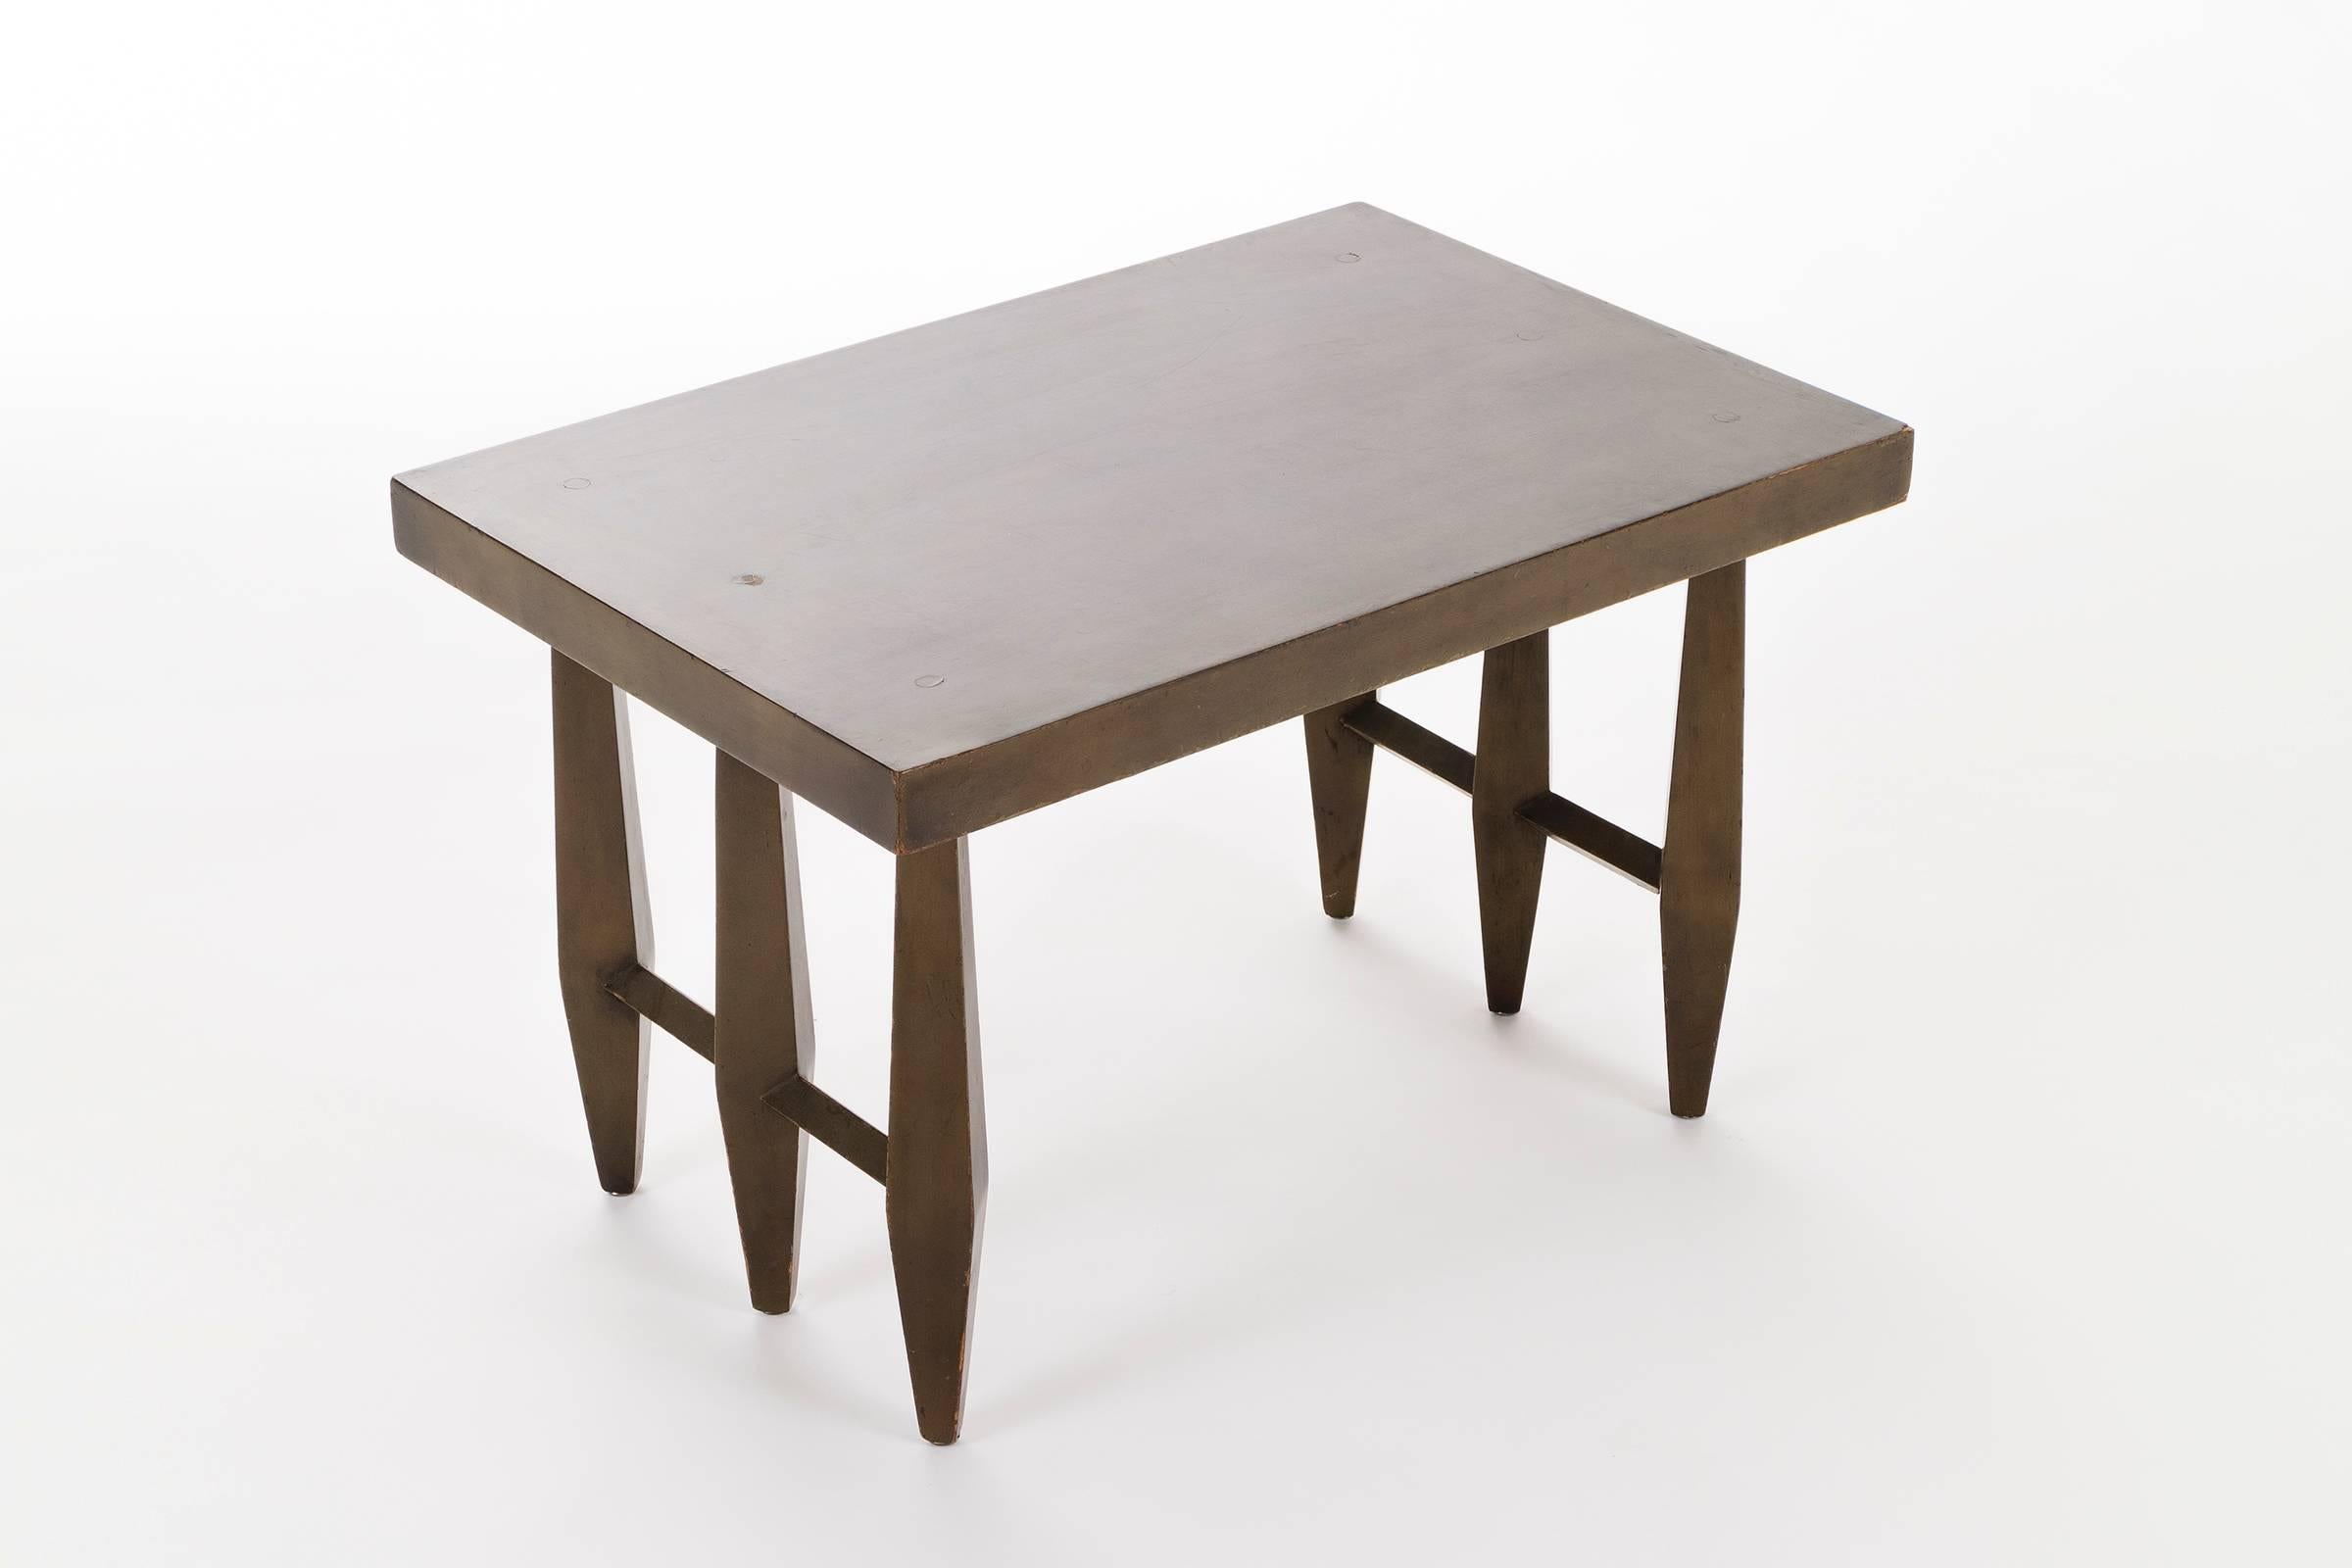 French table designed by Rapheäl.